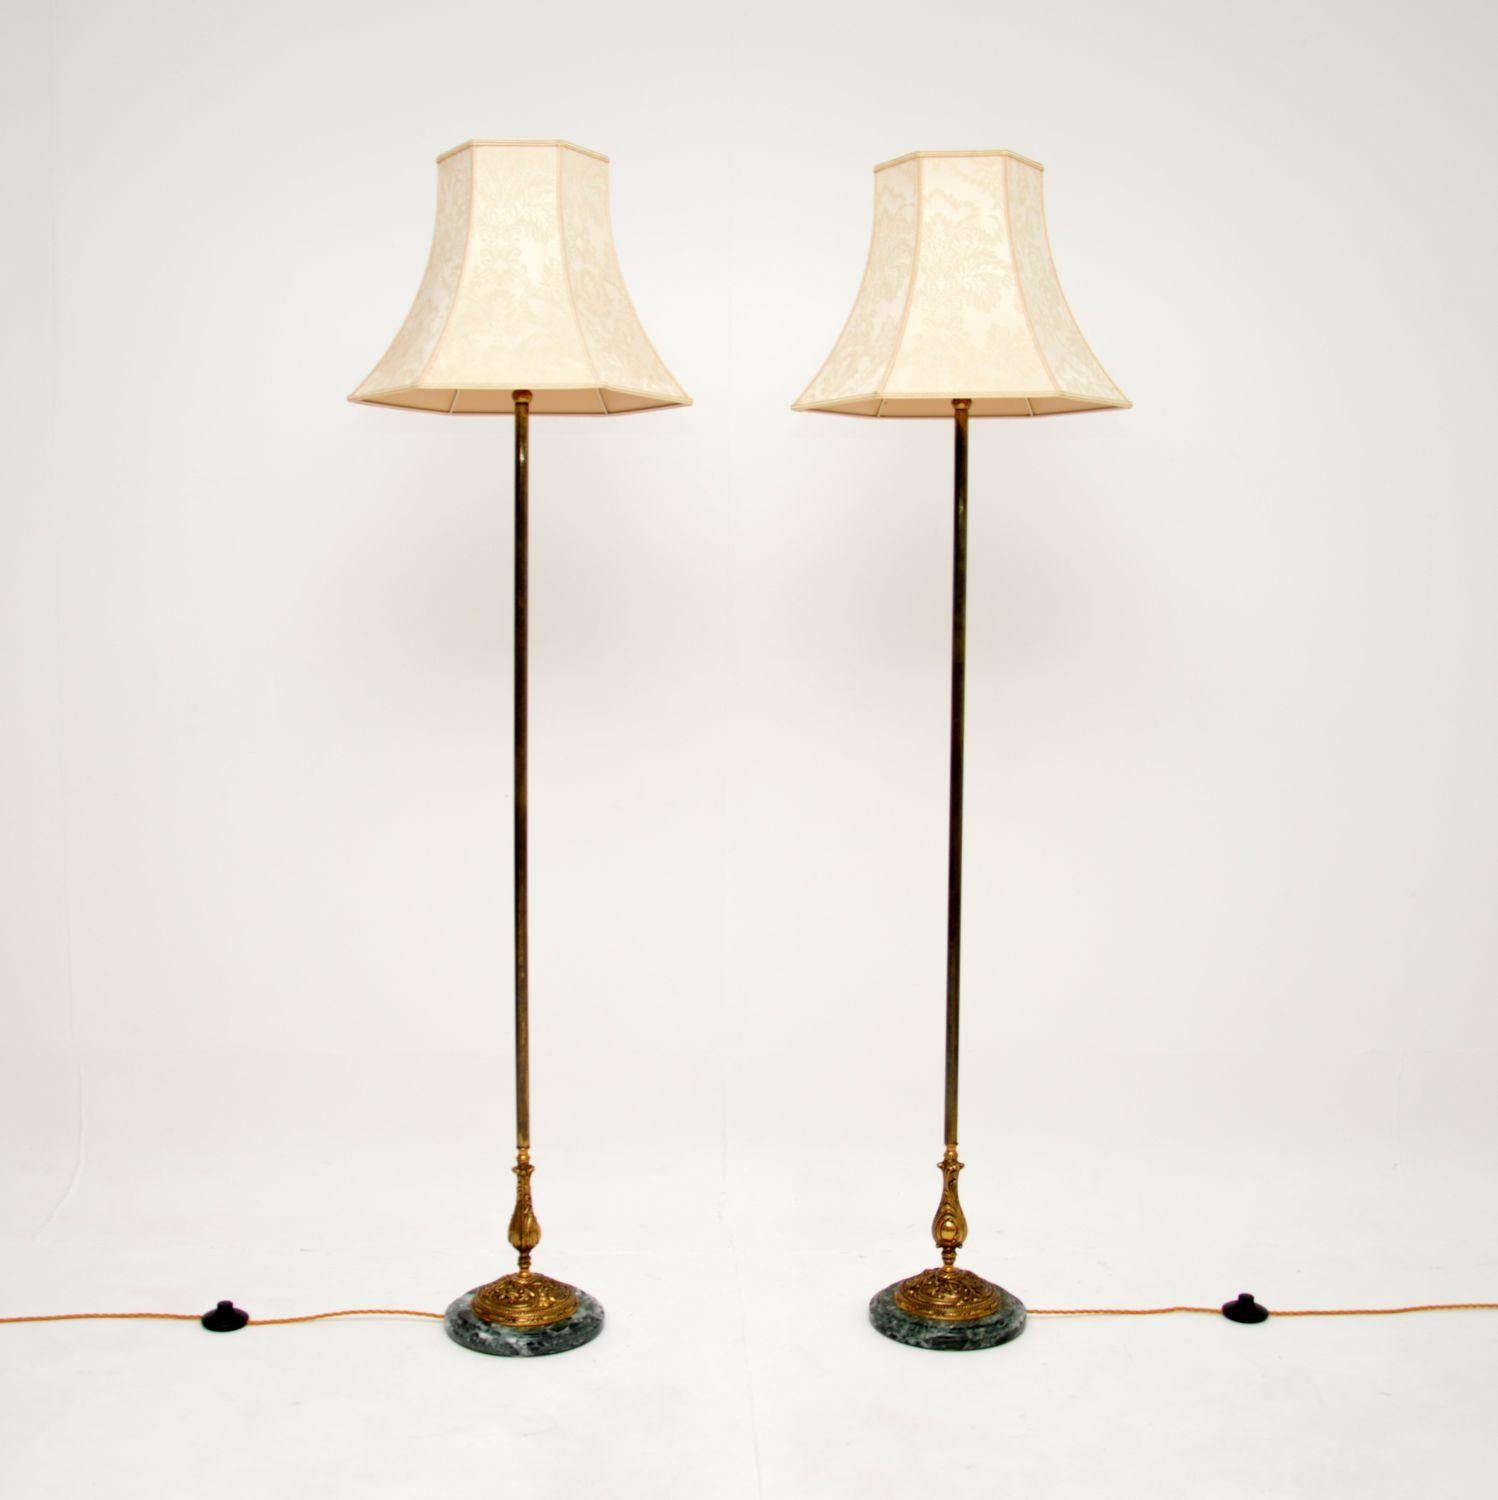 
A stunning pair of antique French floor lamps in solid brass with beautiful green marble bases. They date from around the 1920-30’s.

They are of lovely quality, with gorgeous details to the brass work and stunning colour tones on the marble bases.